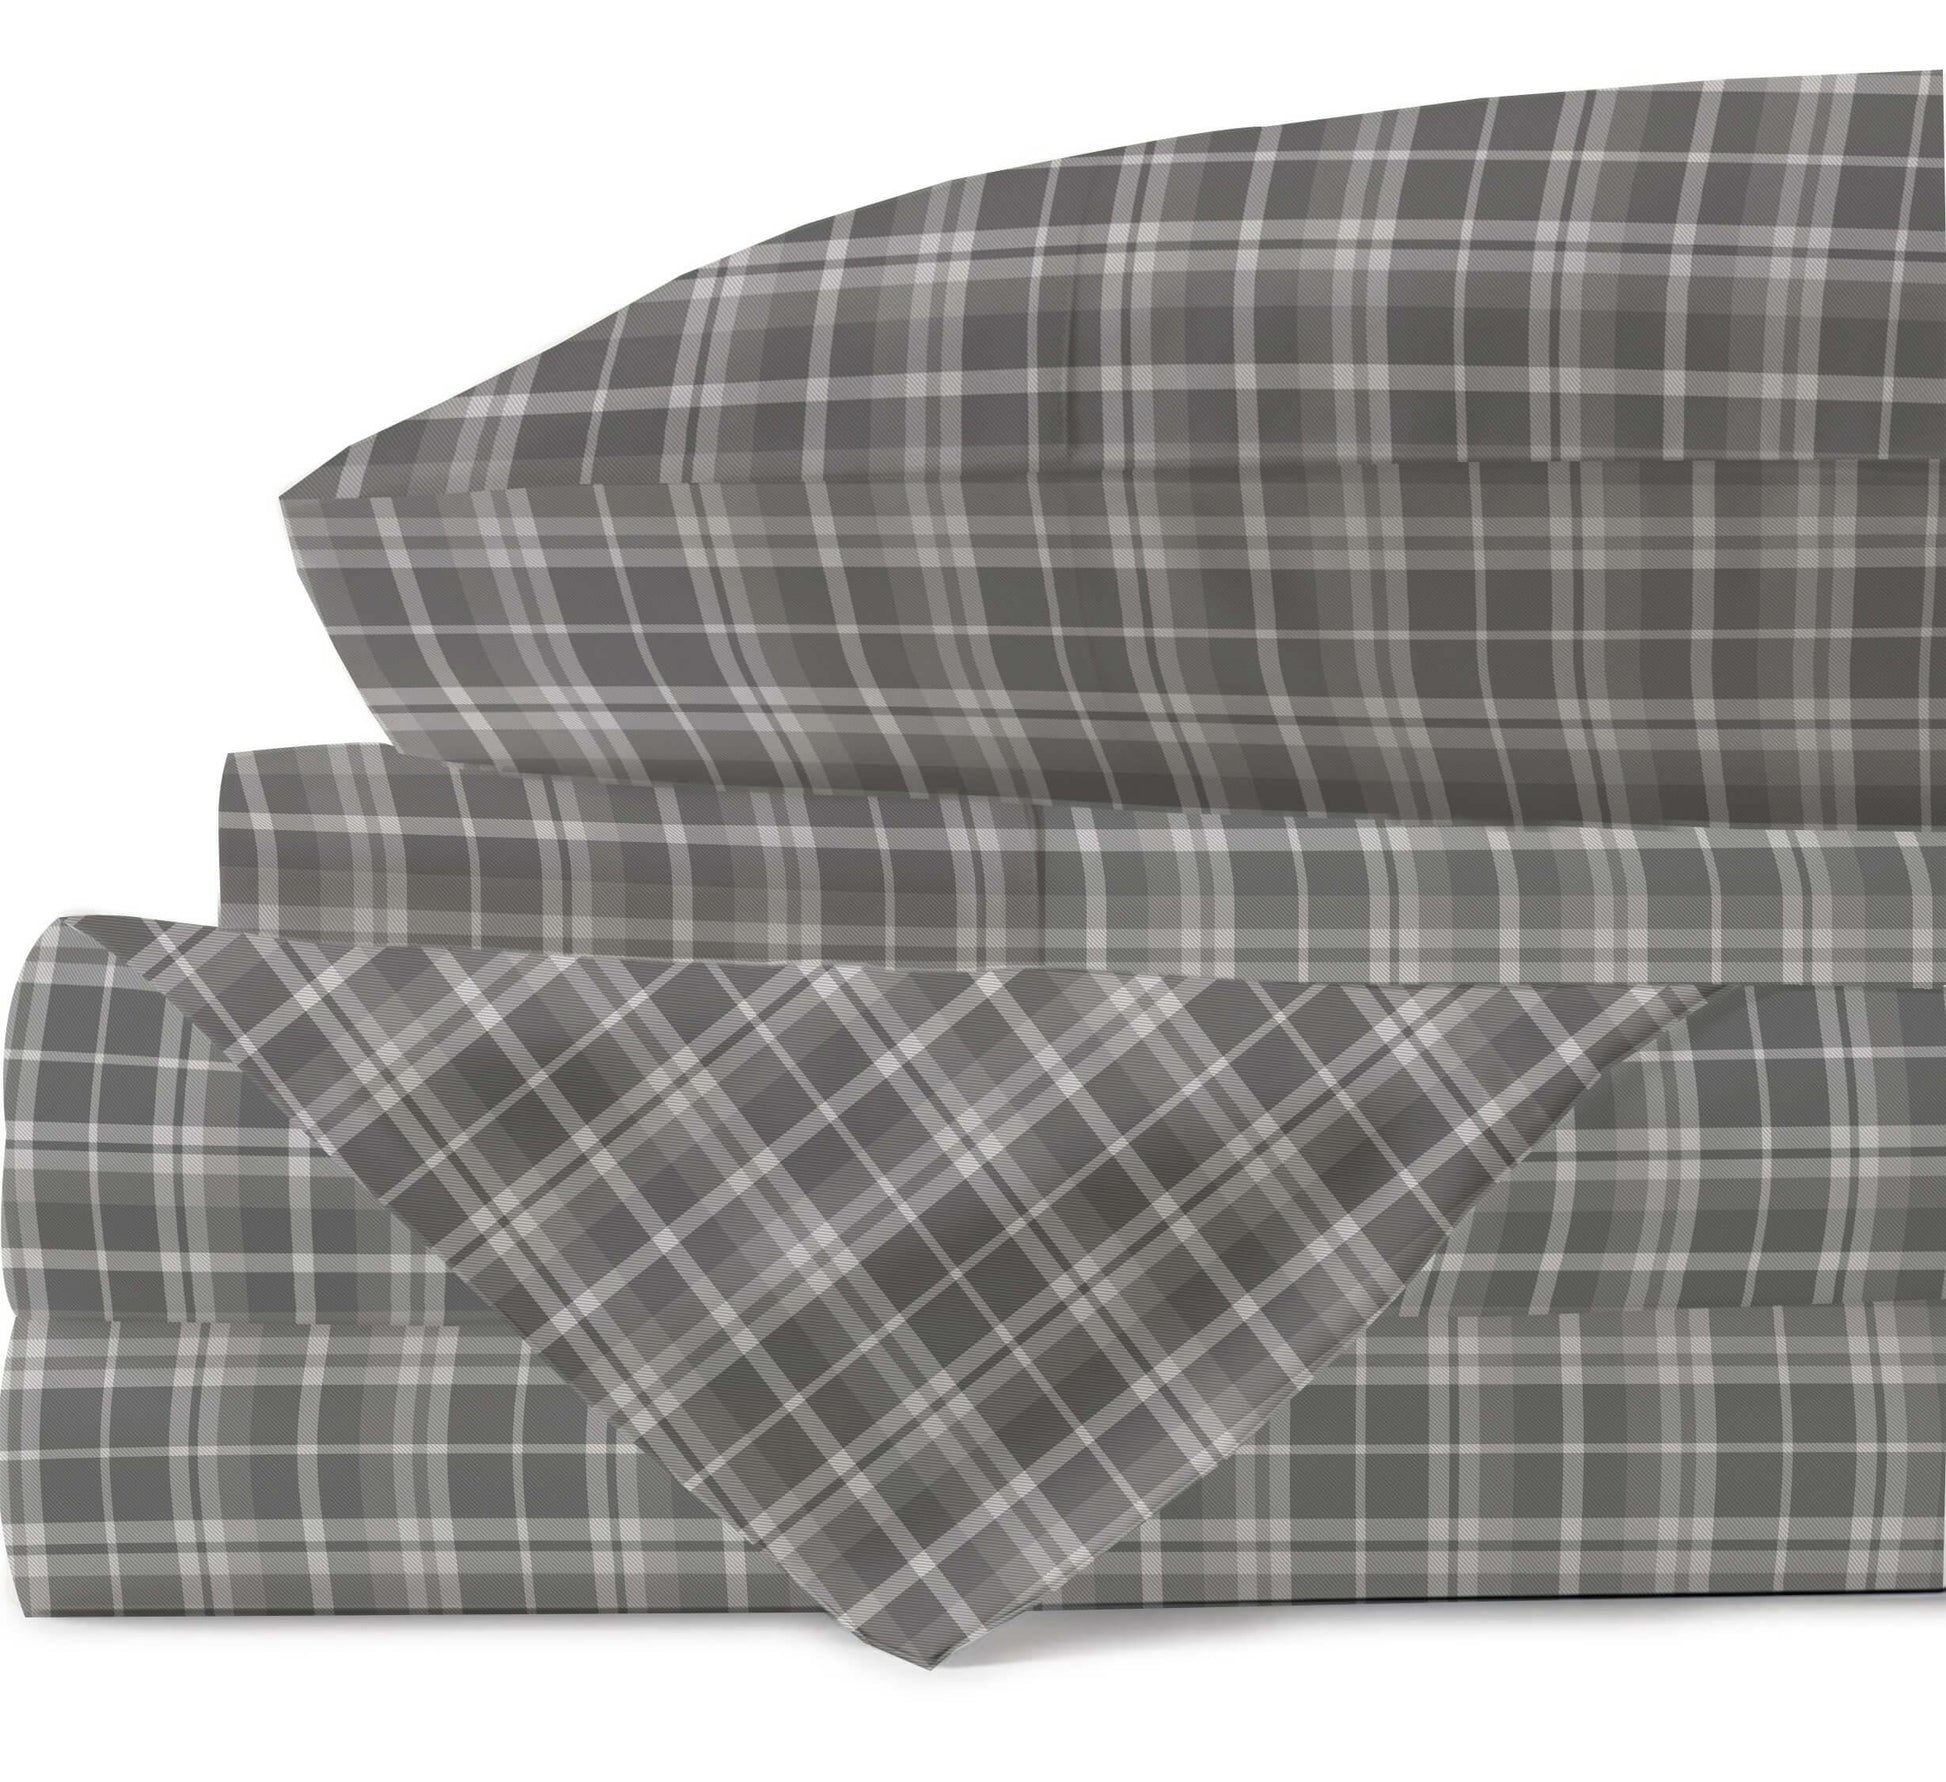 lavish-touch-100-cotton-velvety-soft-heavyweight-double-brushed-flannel-ultra-soft-deep-pocket-king-bed-4pc-sheet-set-checks